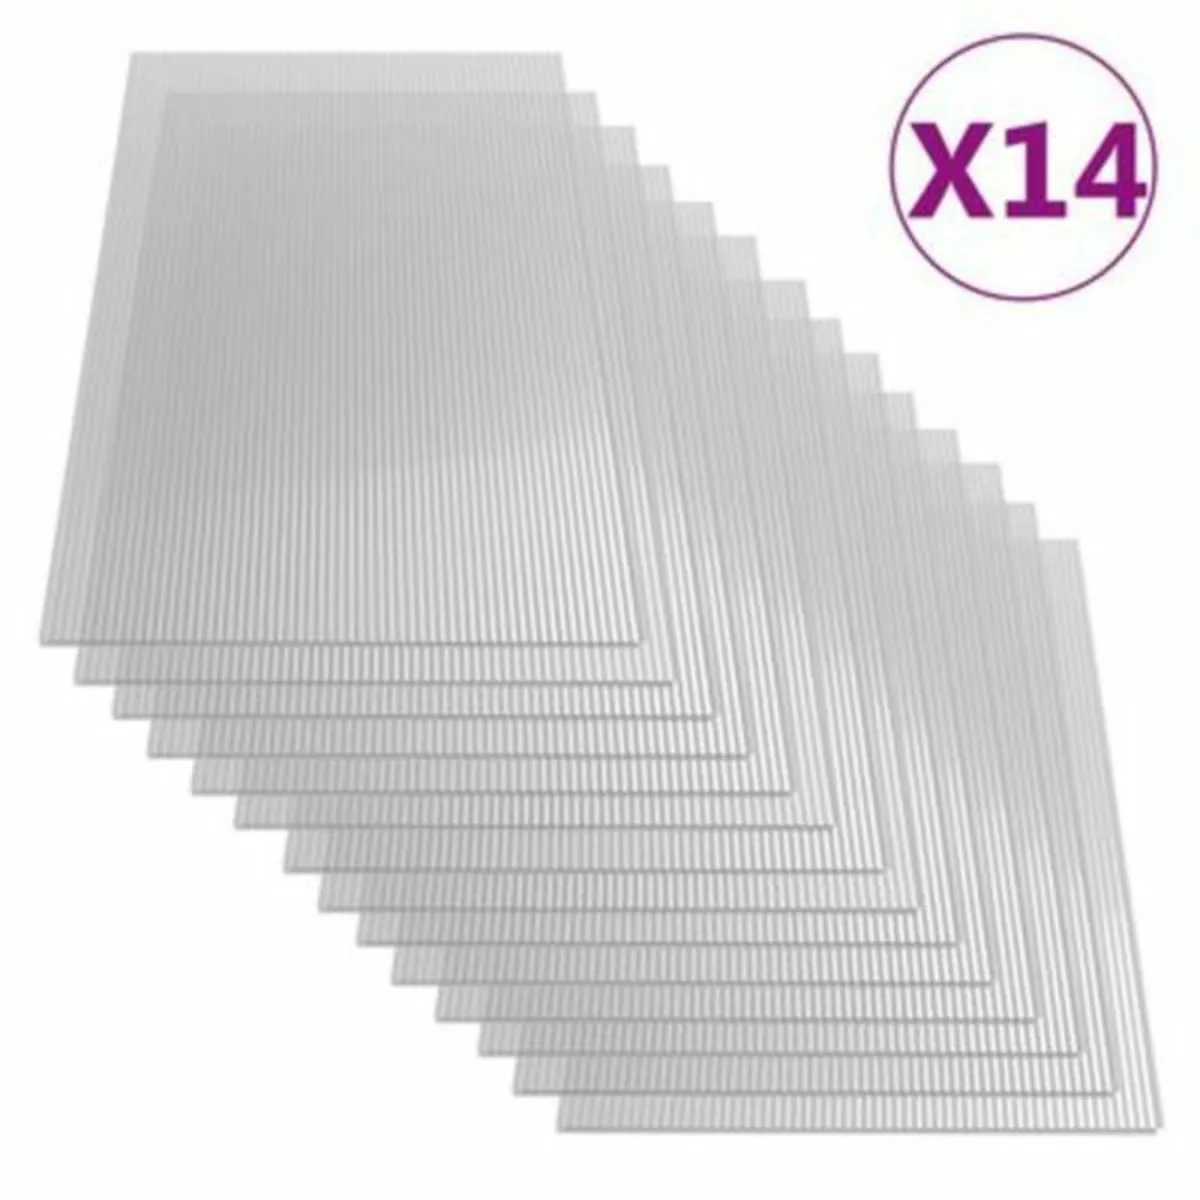 14 Polycarbonate sheets 1210mm x 605mm - Image 1